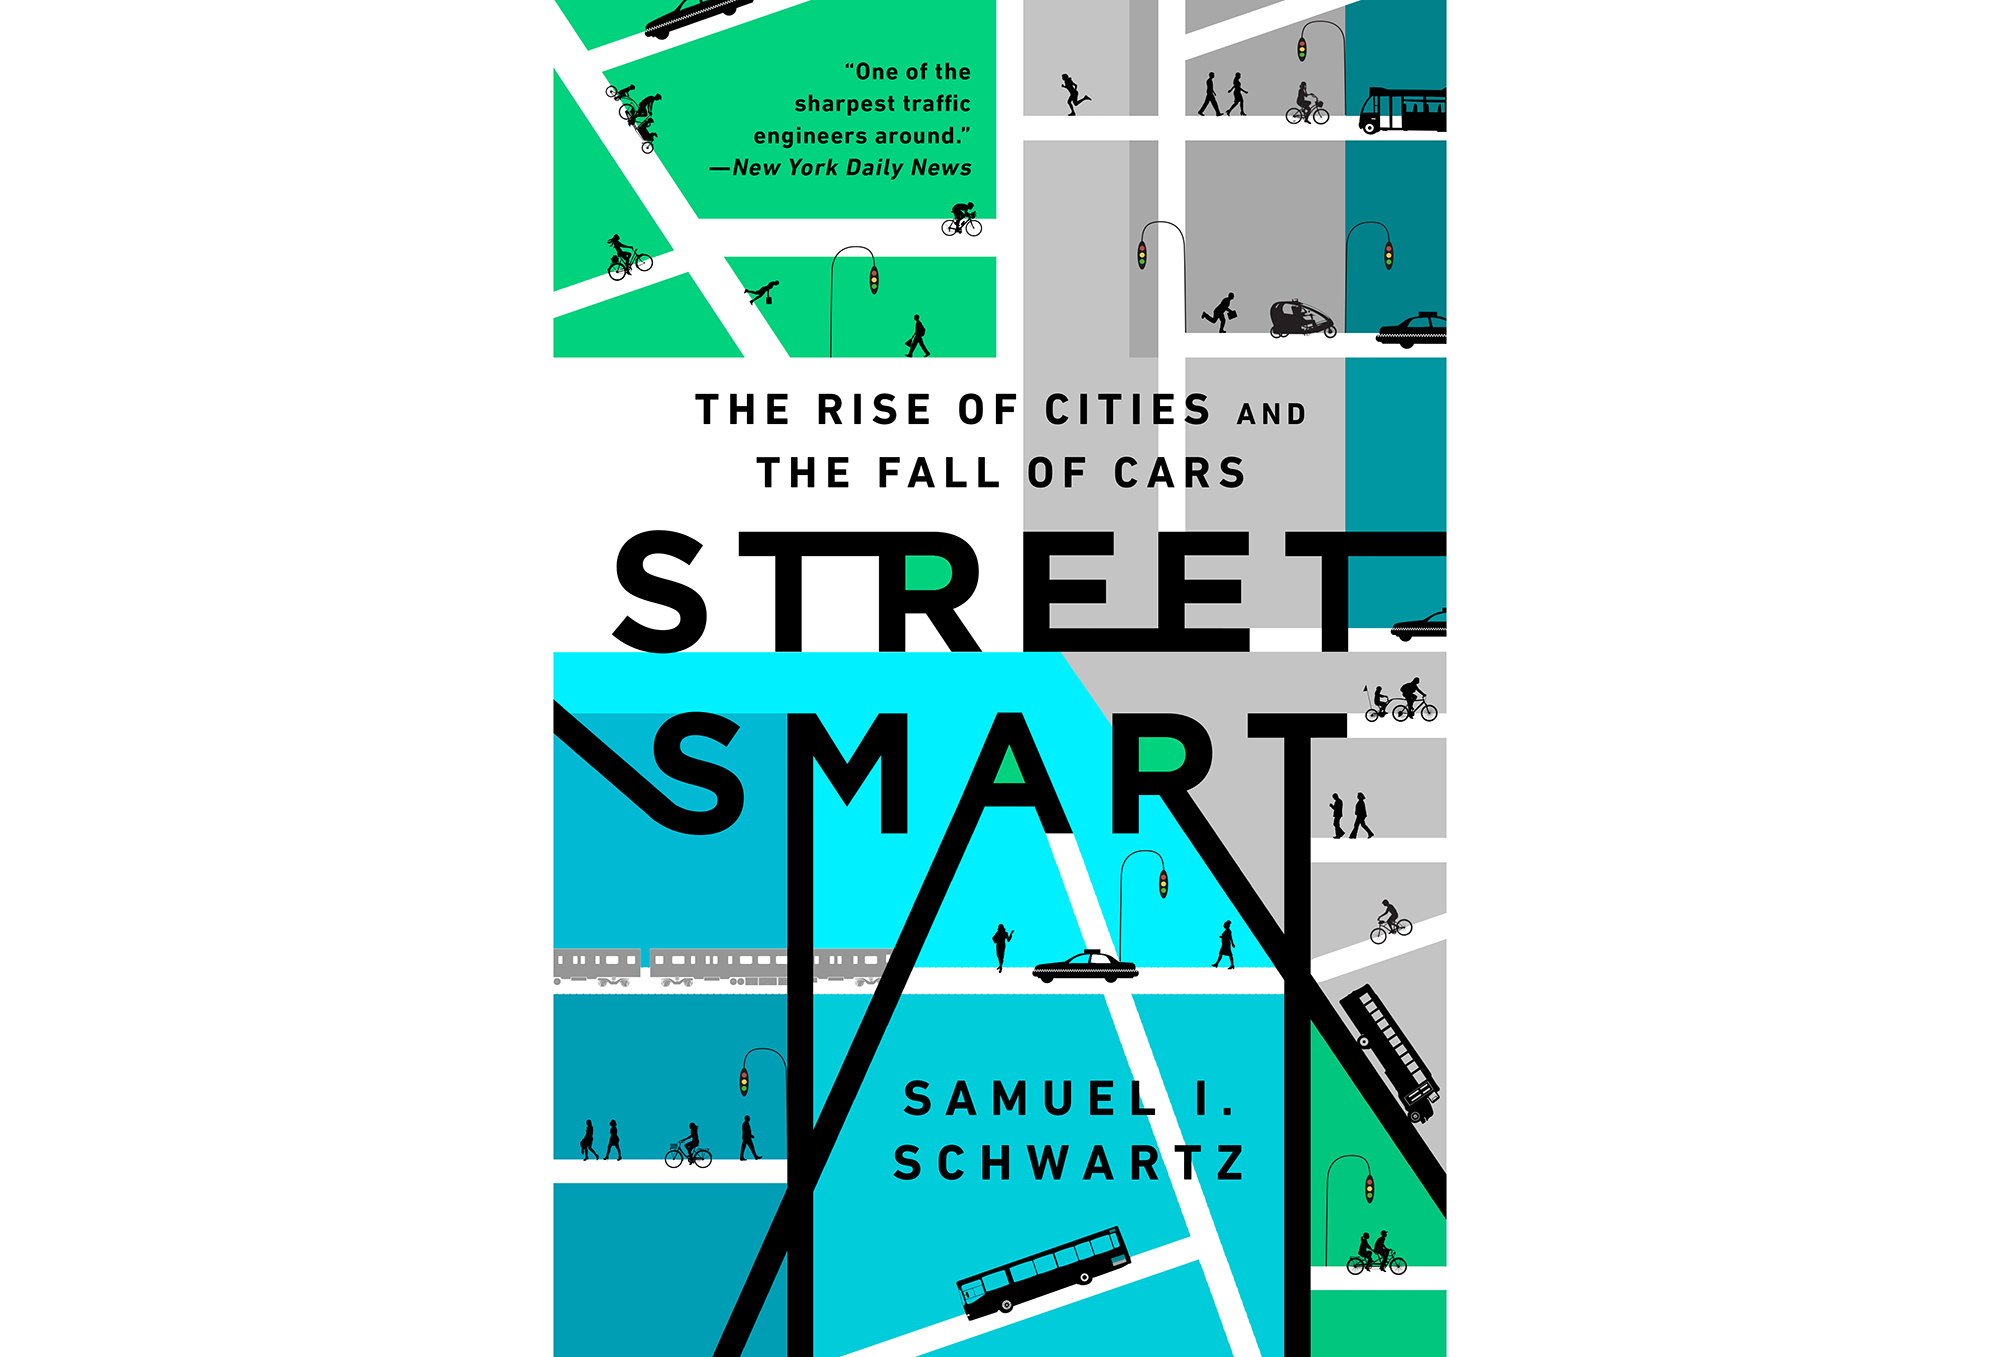 Oculus Quick Take: Street Smart: The Rise of Cities and the Fall of Cars